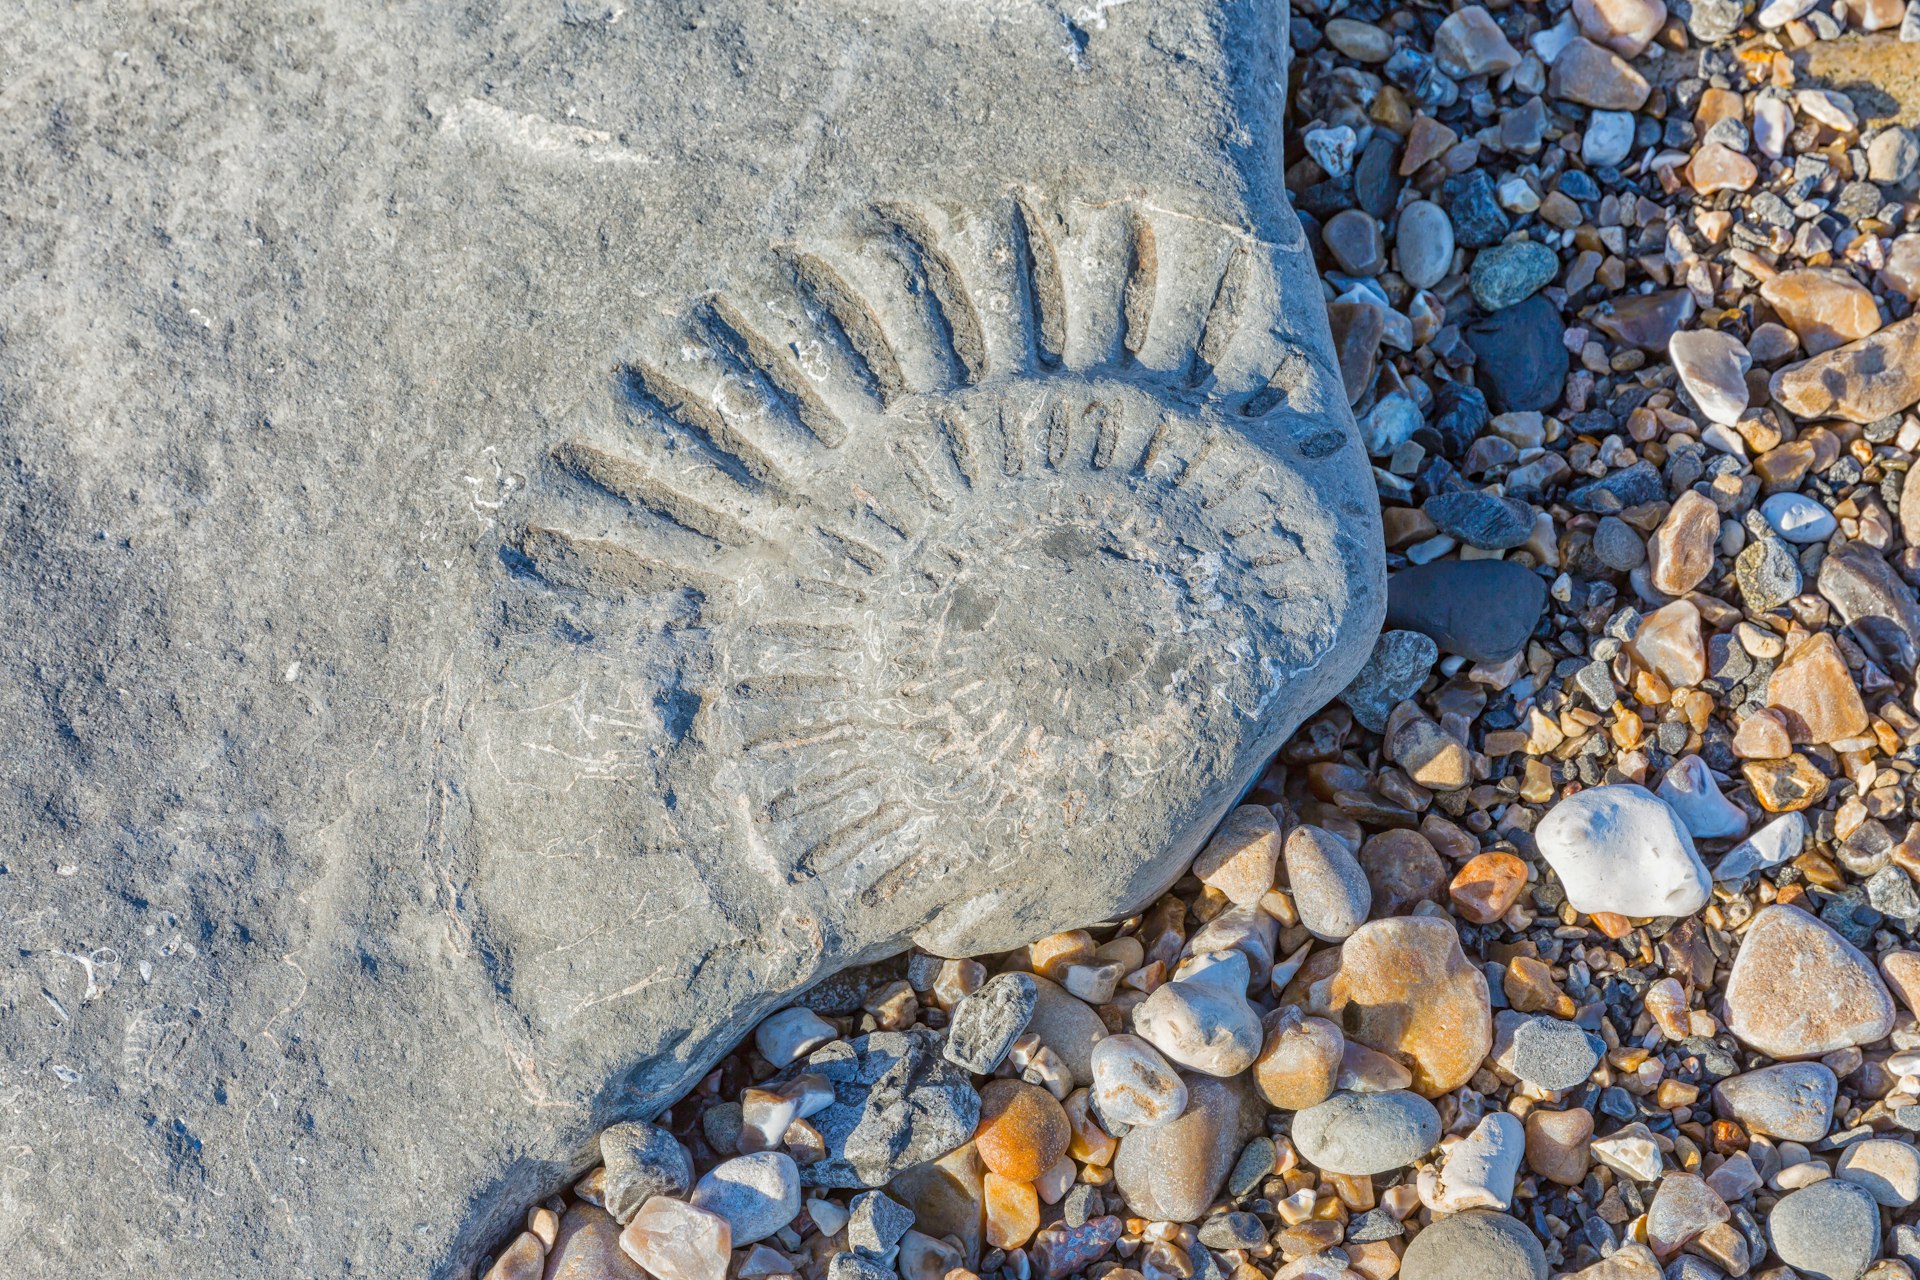 A large ammonite fossil in a beach boulder at Lyme Regis on Dorset's Jurassic Coast